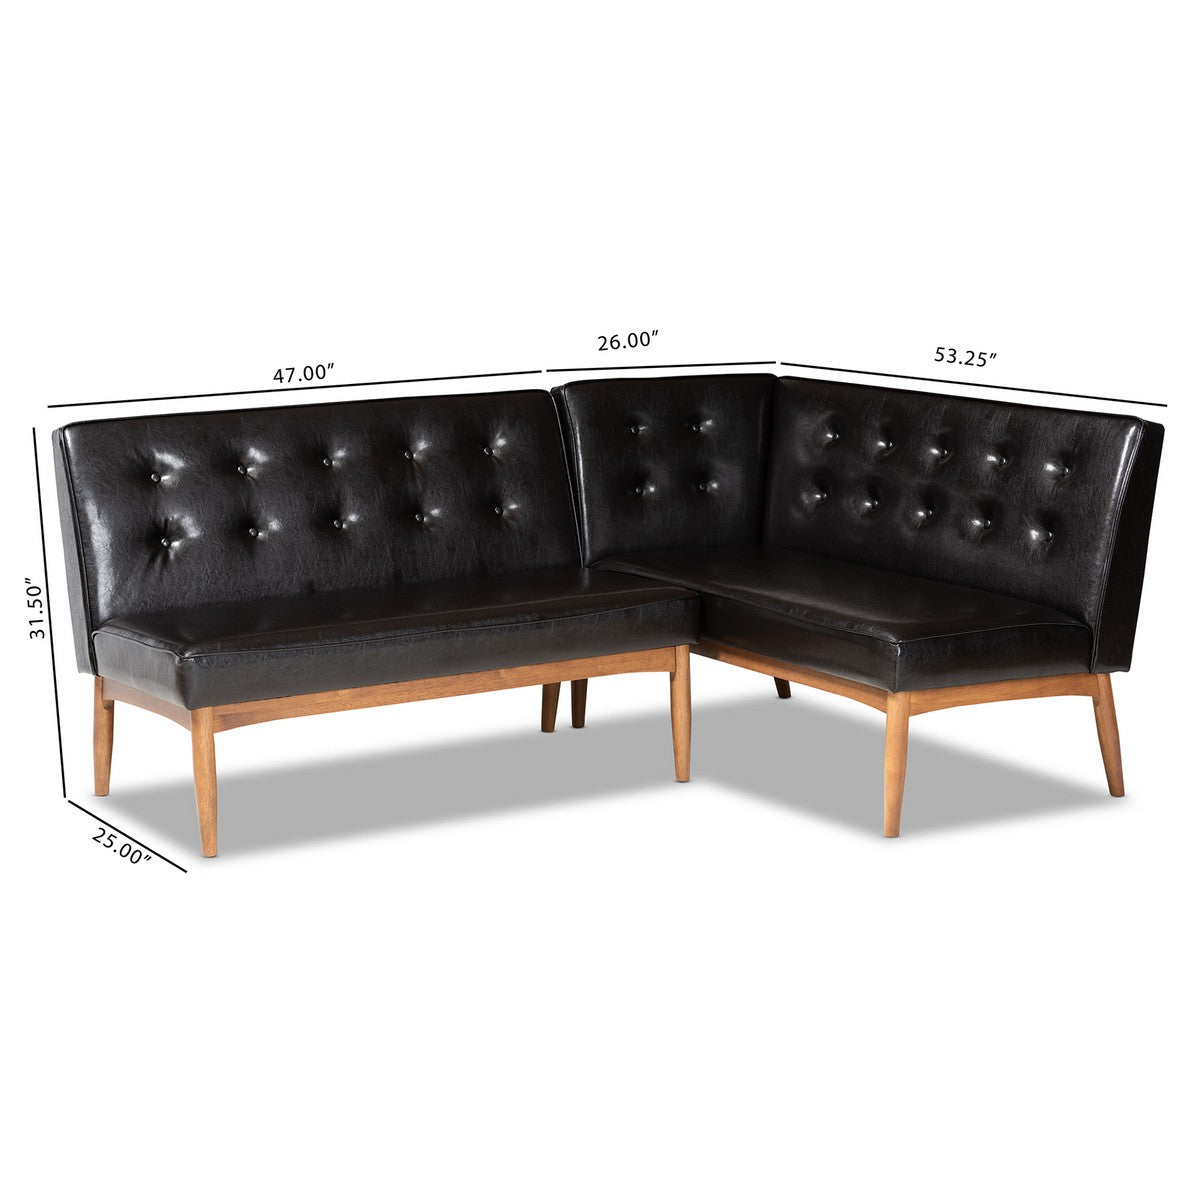 Baxton Studio Arvid Mid-Century Modern Dark Brown Faux Leather Upholstered 2-Piece Wood Dining Nook Banquette Set